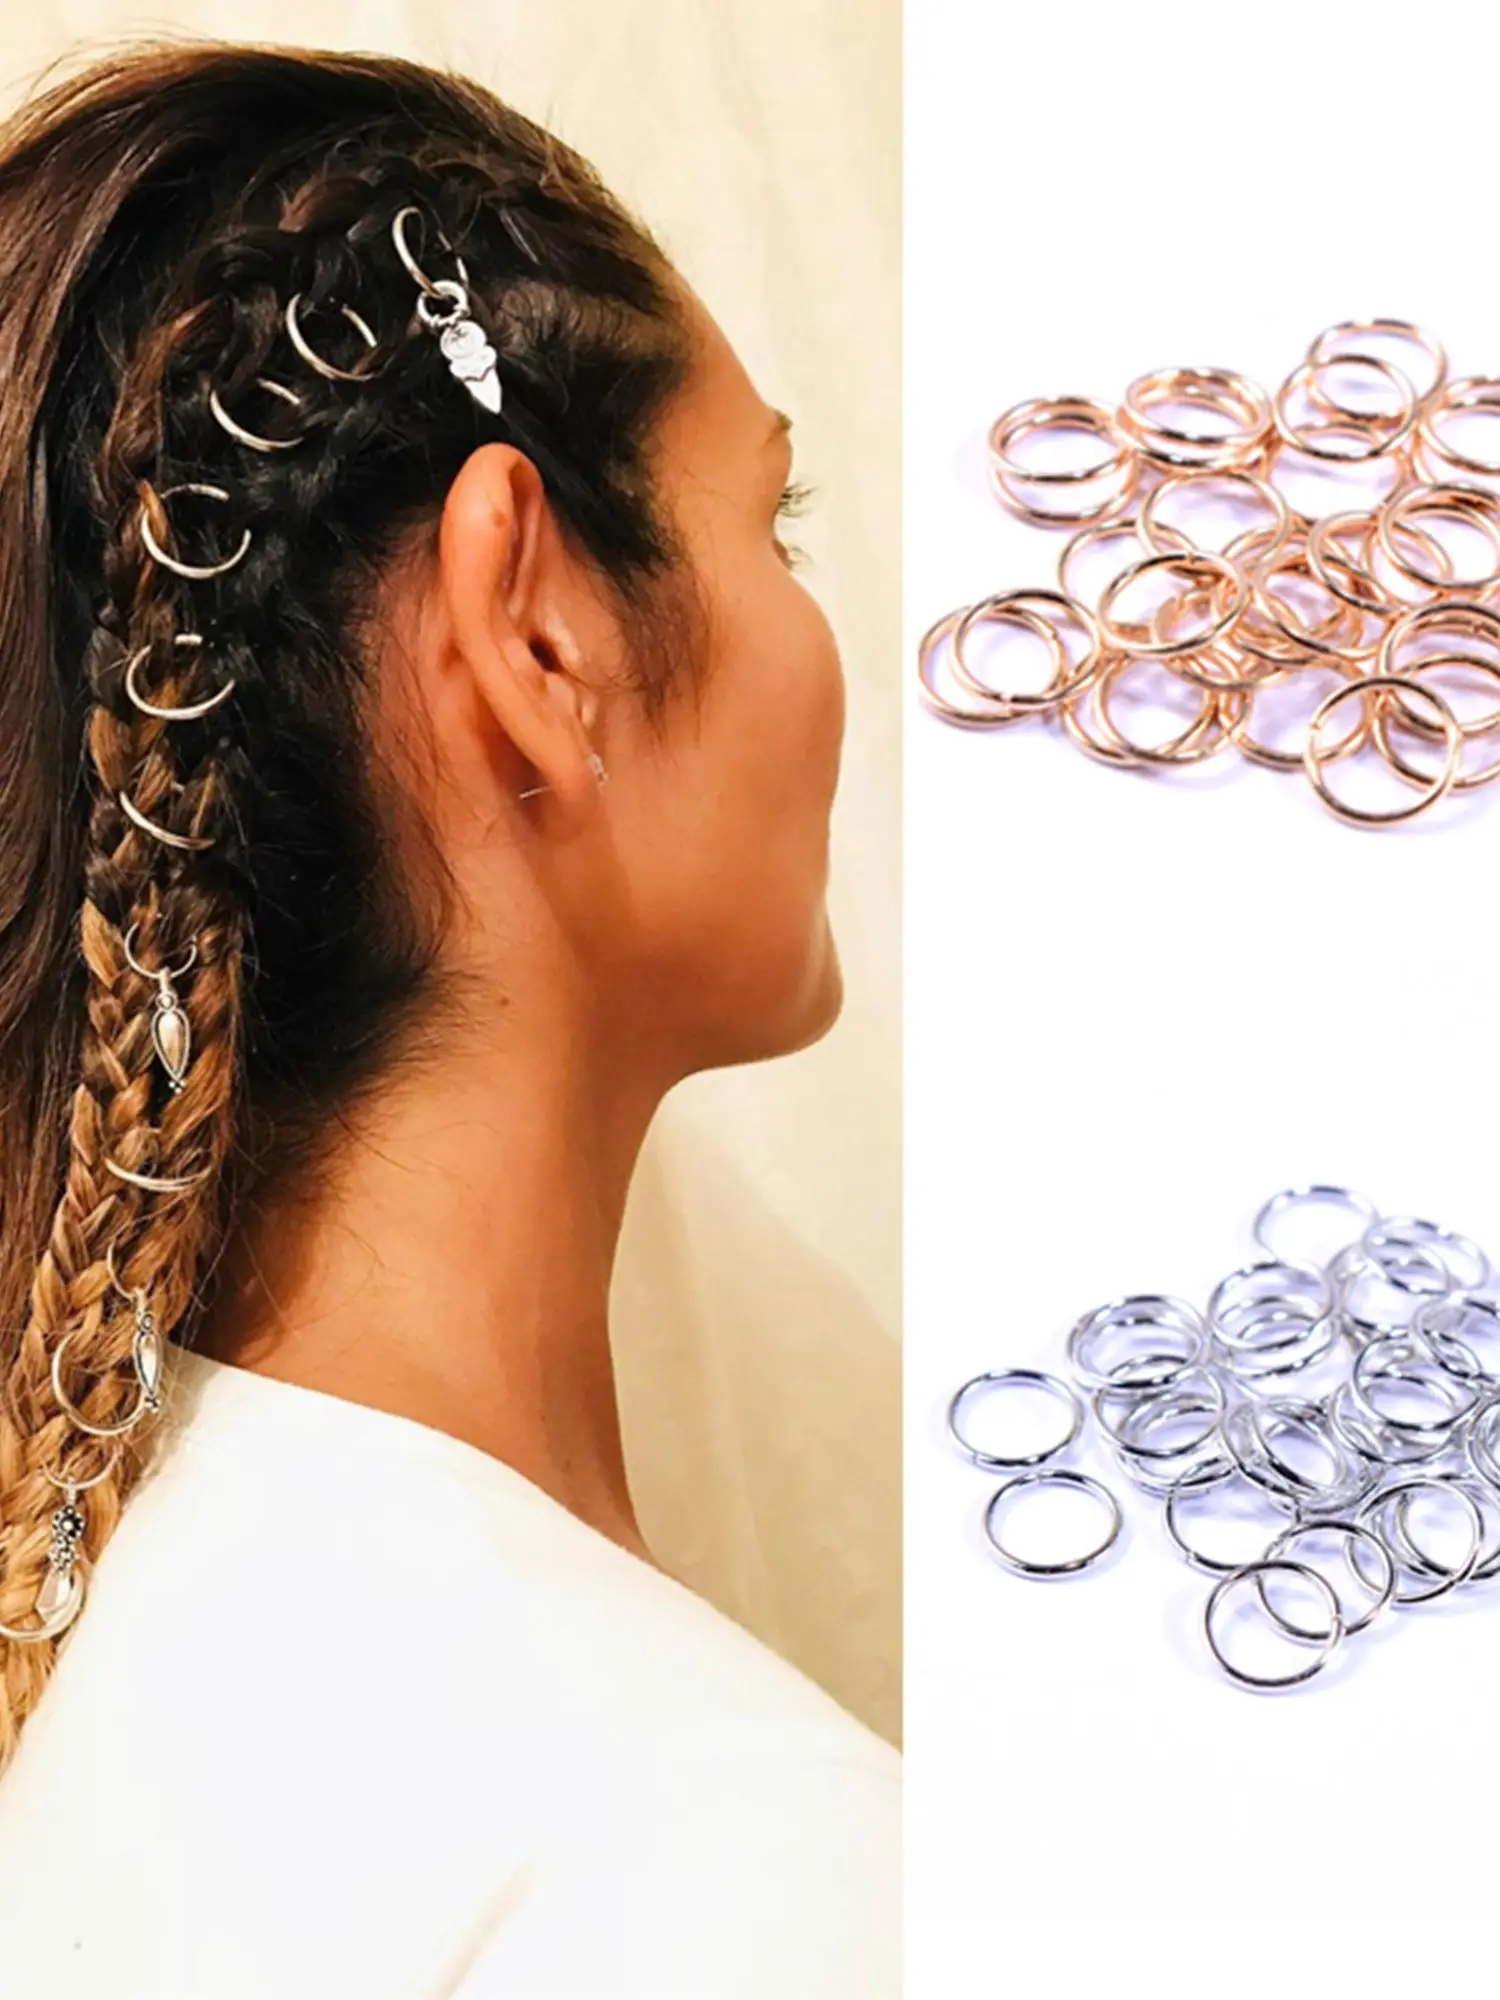 Style Different Starfish Shell Hair Rings Braid Hair Clips Cuffs Rings Jewelry Dreadlock Clasps Accessories for Girls Women 2021